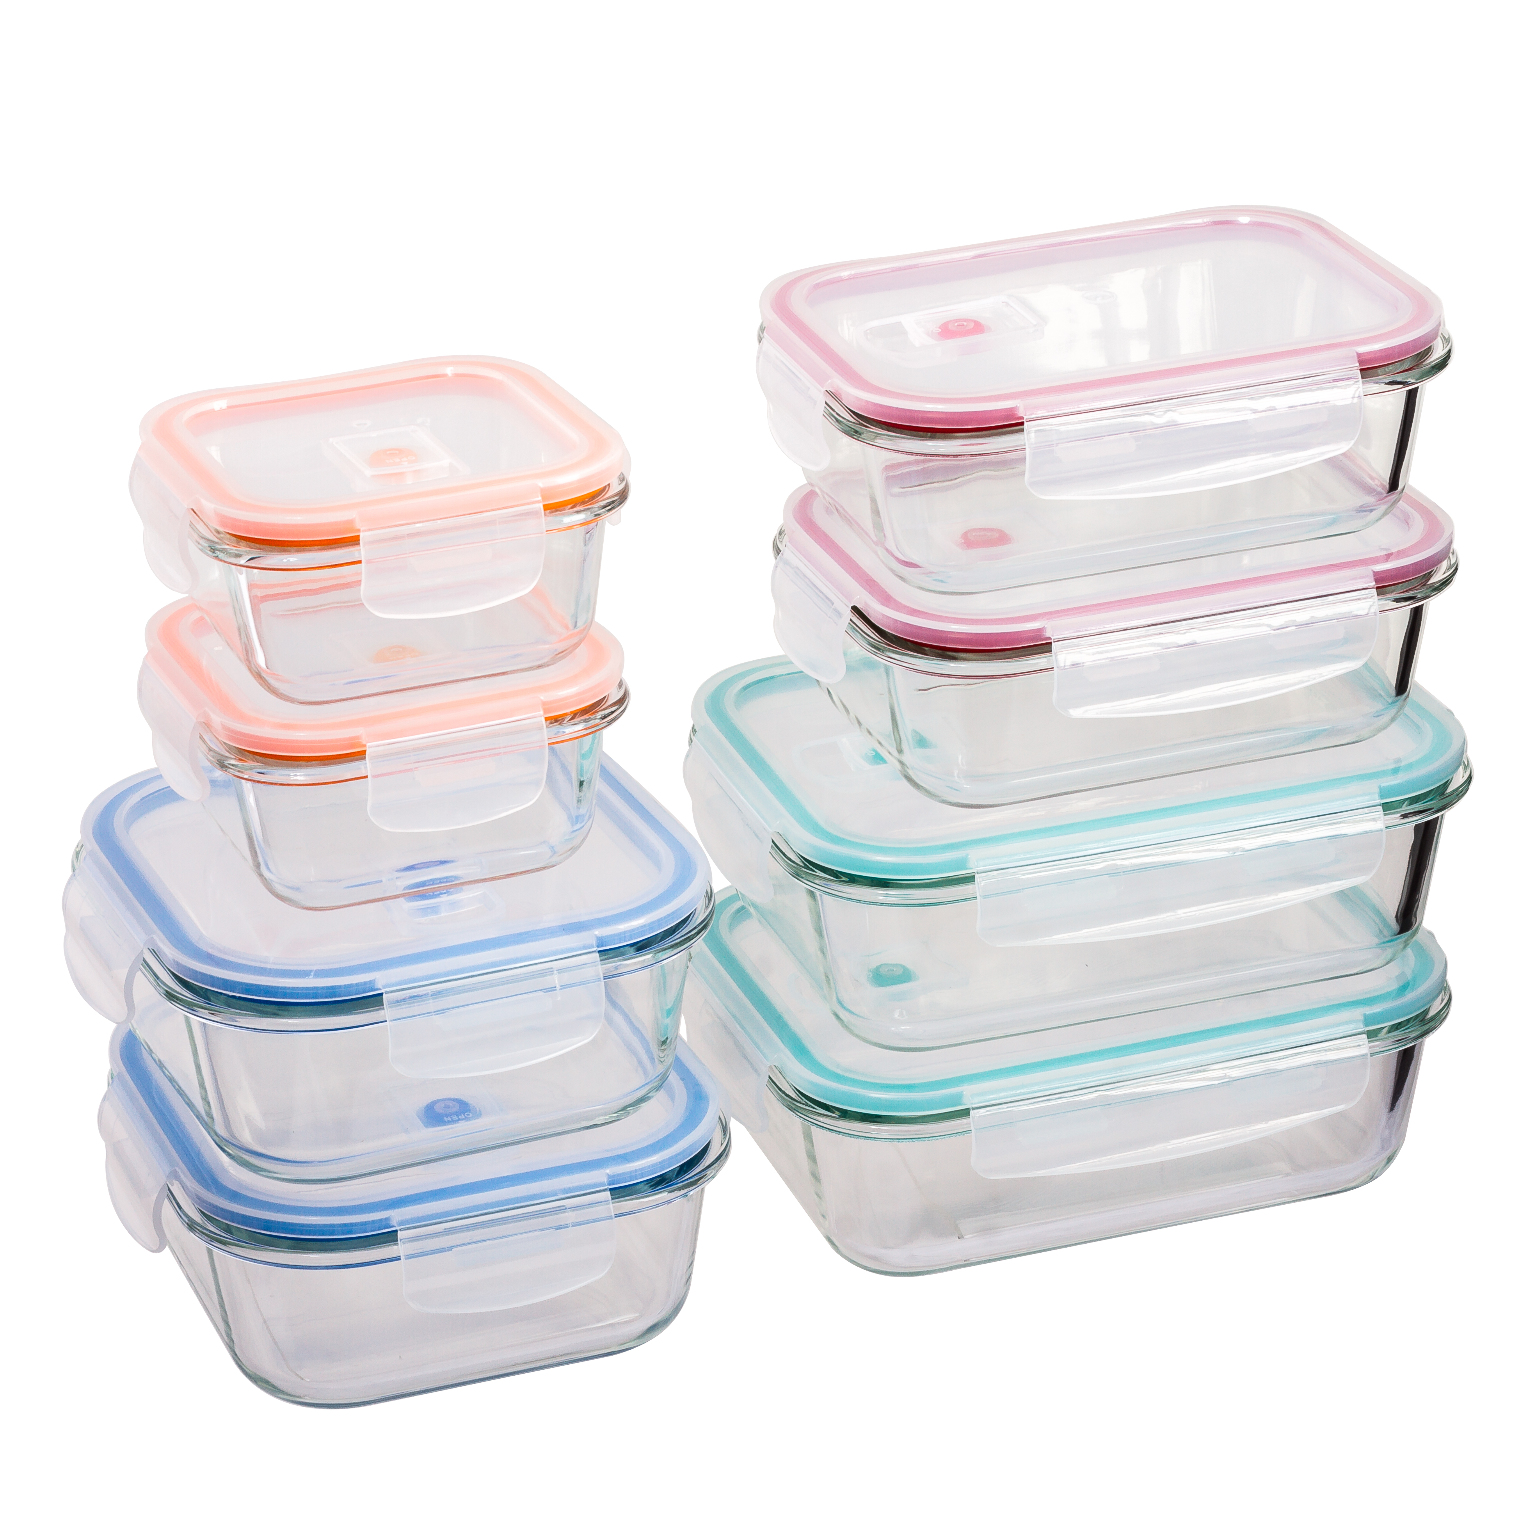 bayco-glass-food-storage-containers-with-lids-18-piece-glass-meal